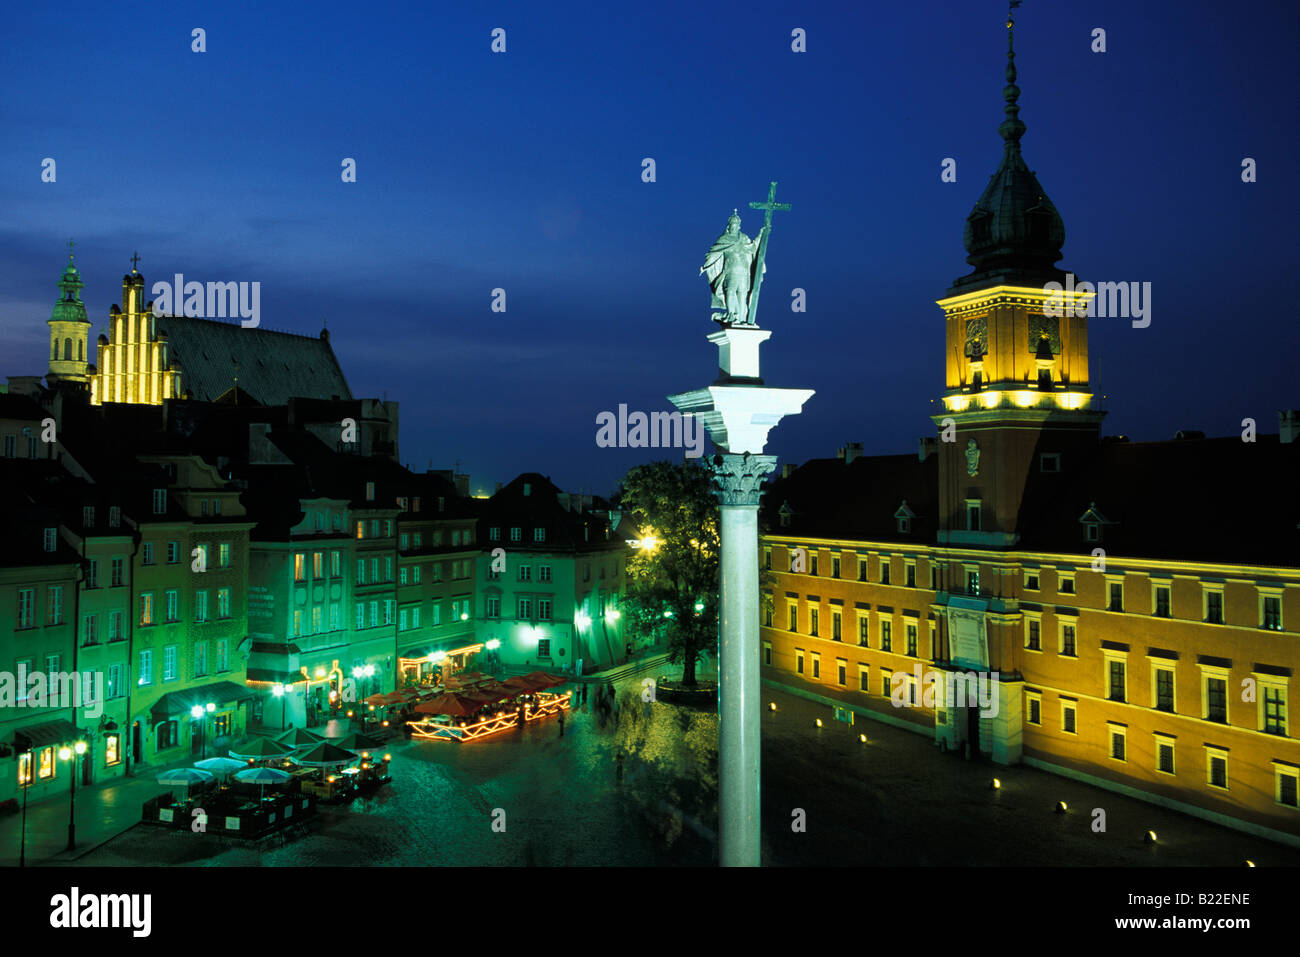 A view over Sigismund Statue to Castle Square in the Old Town with the Royal Palace Warsaw Poland Stock Photo